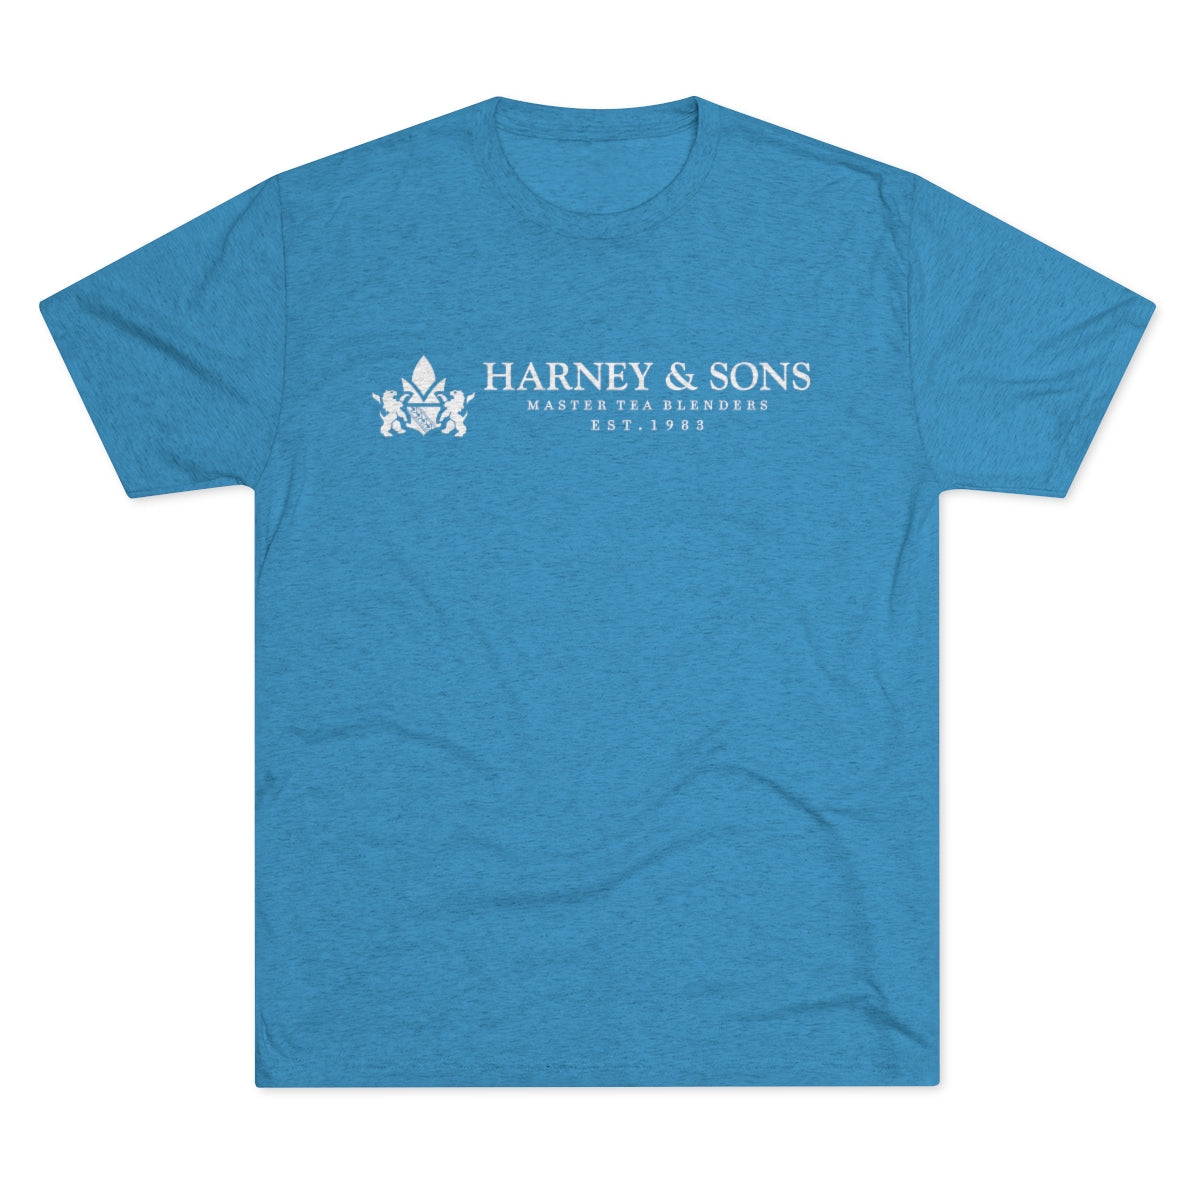 Harney & Sons - Est. 1983 Graphic Tee - Tri-Blend Vintage Turquoise S - Harney & Sons Fine Teas